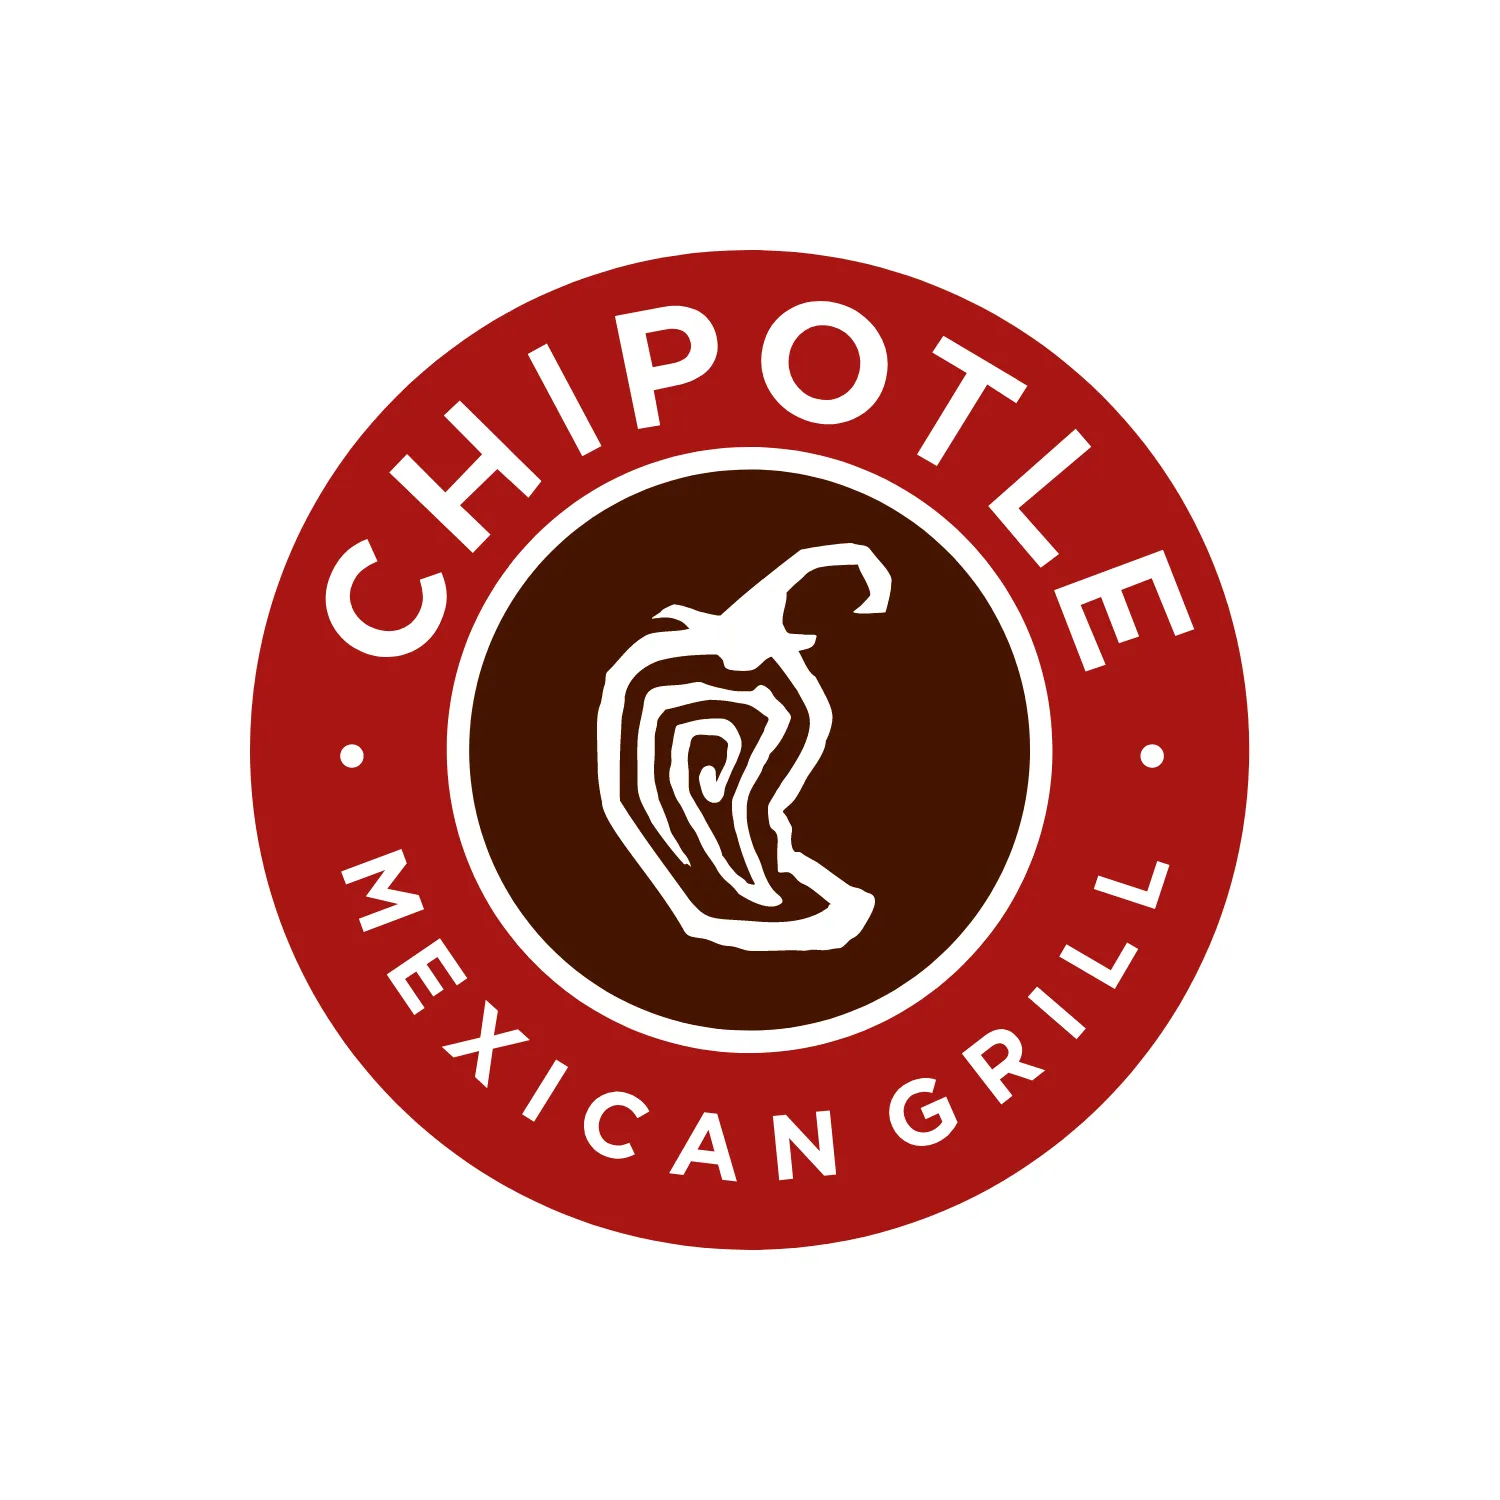 Database of Chipotle Locations in the United States